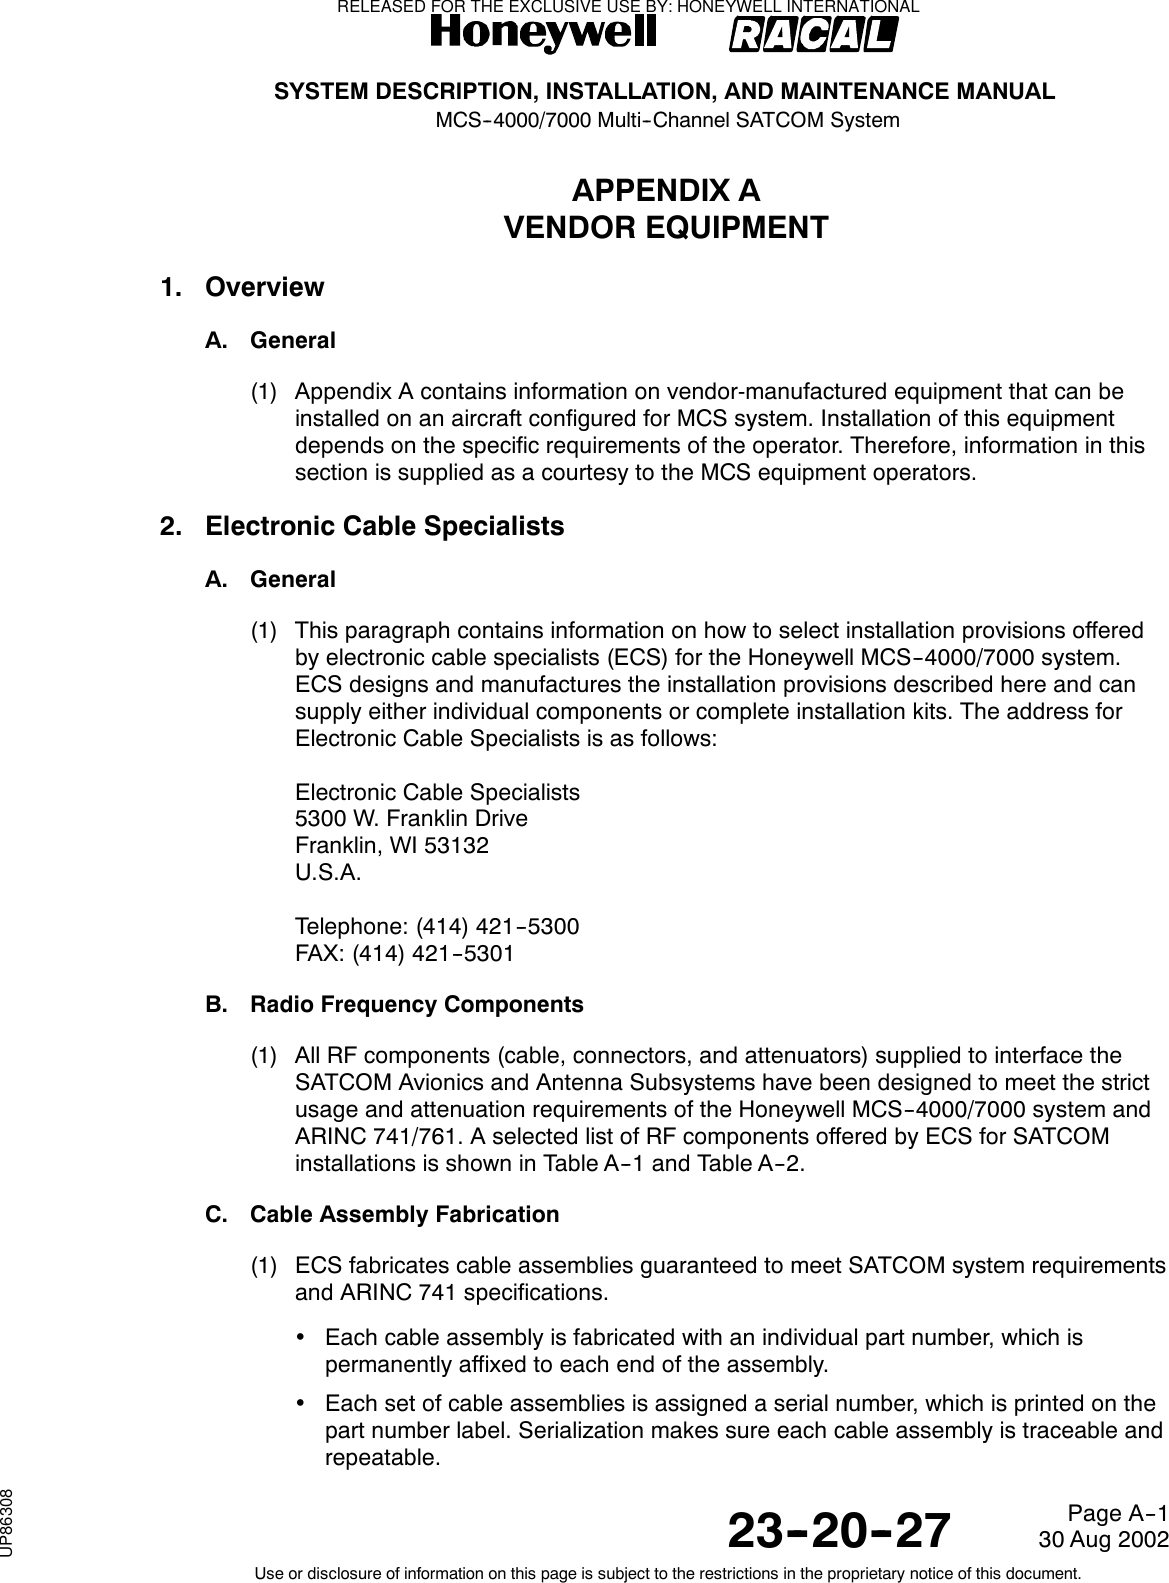 SYSTEM DESCRIPTION, INSTALLATION, AND MAINTENANCE MANUALMCS--4000/7000 Multi--Channel SATCOM System23--20--2730 Aug 2002Use or disclosure of information on this page is subject to the restrictions in the proprietary notice of this document.Page A--1APPENDIX AVENDOR EQUIPMENT1. OverviewA. General(1) Appendix A contains information on vendor-manufactured equipment that can beinstalled on an aircraft configured for MCS system. Installation of this equipmentdepends on the specific requirements of the operator. Therefore, information in thissection is supplied as a courtesy to the MCS equipment operators.2. Electronic Cable SpecialistsA. General(1) This paragraph contains information on how to select installation provisions offeredby electronic cable specialists (ECS) for the Honeywell MCS--4000/7000 system.ECS designs and manufactures the installation provisions described here and cansupply either individual components or complete installation kits. The address forElectronic Cable Specialists is as follows:Electronic Cable Specialists5300 W. Franklin DriveFranklin, WI 53132U.S.A.Telephone: (414) 421--5300FAX: (414) 421--5301B. Radio Frequency Components(1) All RF components (cable, connectors, and attenuators) supplied to interface theSATCOM Avionics and Antenna Subsystems have been designed to meet the strictusage and attenuation requirements of the Honeywell MCS--4000/7000 system andARINC 741/761. A selected list of RF components offered by ECS for SATCOMinstallations is shown in Table A--1 and Table A--2.C. Cable Assembly Fabrication(1) ECS fabricates cable assemblies guaranteed to meet SATCOM system requirementsand ARINC 741 specifications.•Each cable assembly is fabricated with an individual part number, which ispermanently affixed to each end of the assembly.•Each set of cable assemblies is assigned a serial number, which is printed on thepart number label. Serialization makes sure each cable assembly is traceable andrepeatable.RELEASED FOR THE EXCLUSIVE USE BY: HONEYWELL INTERNATIONALUP86308